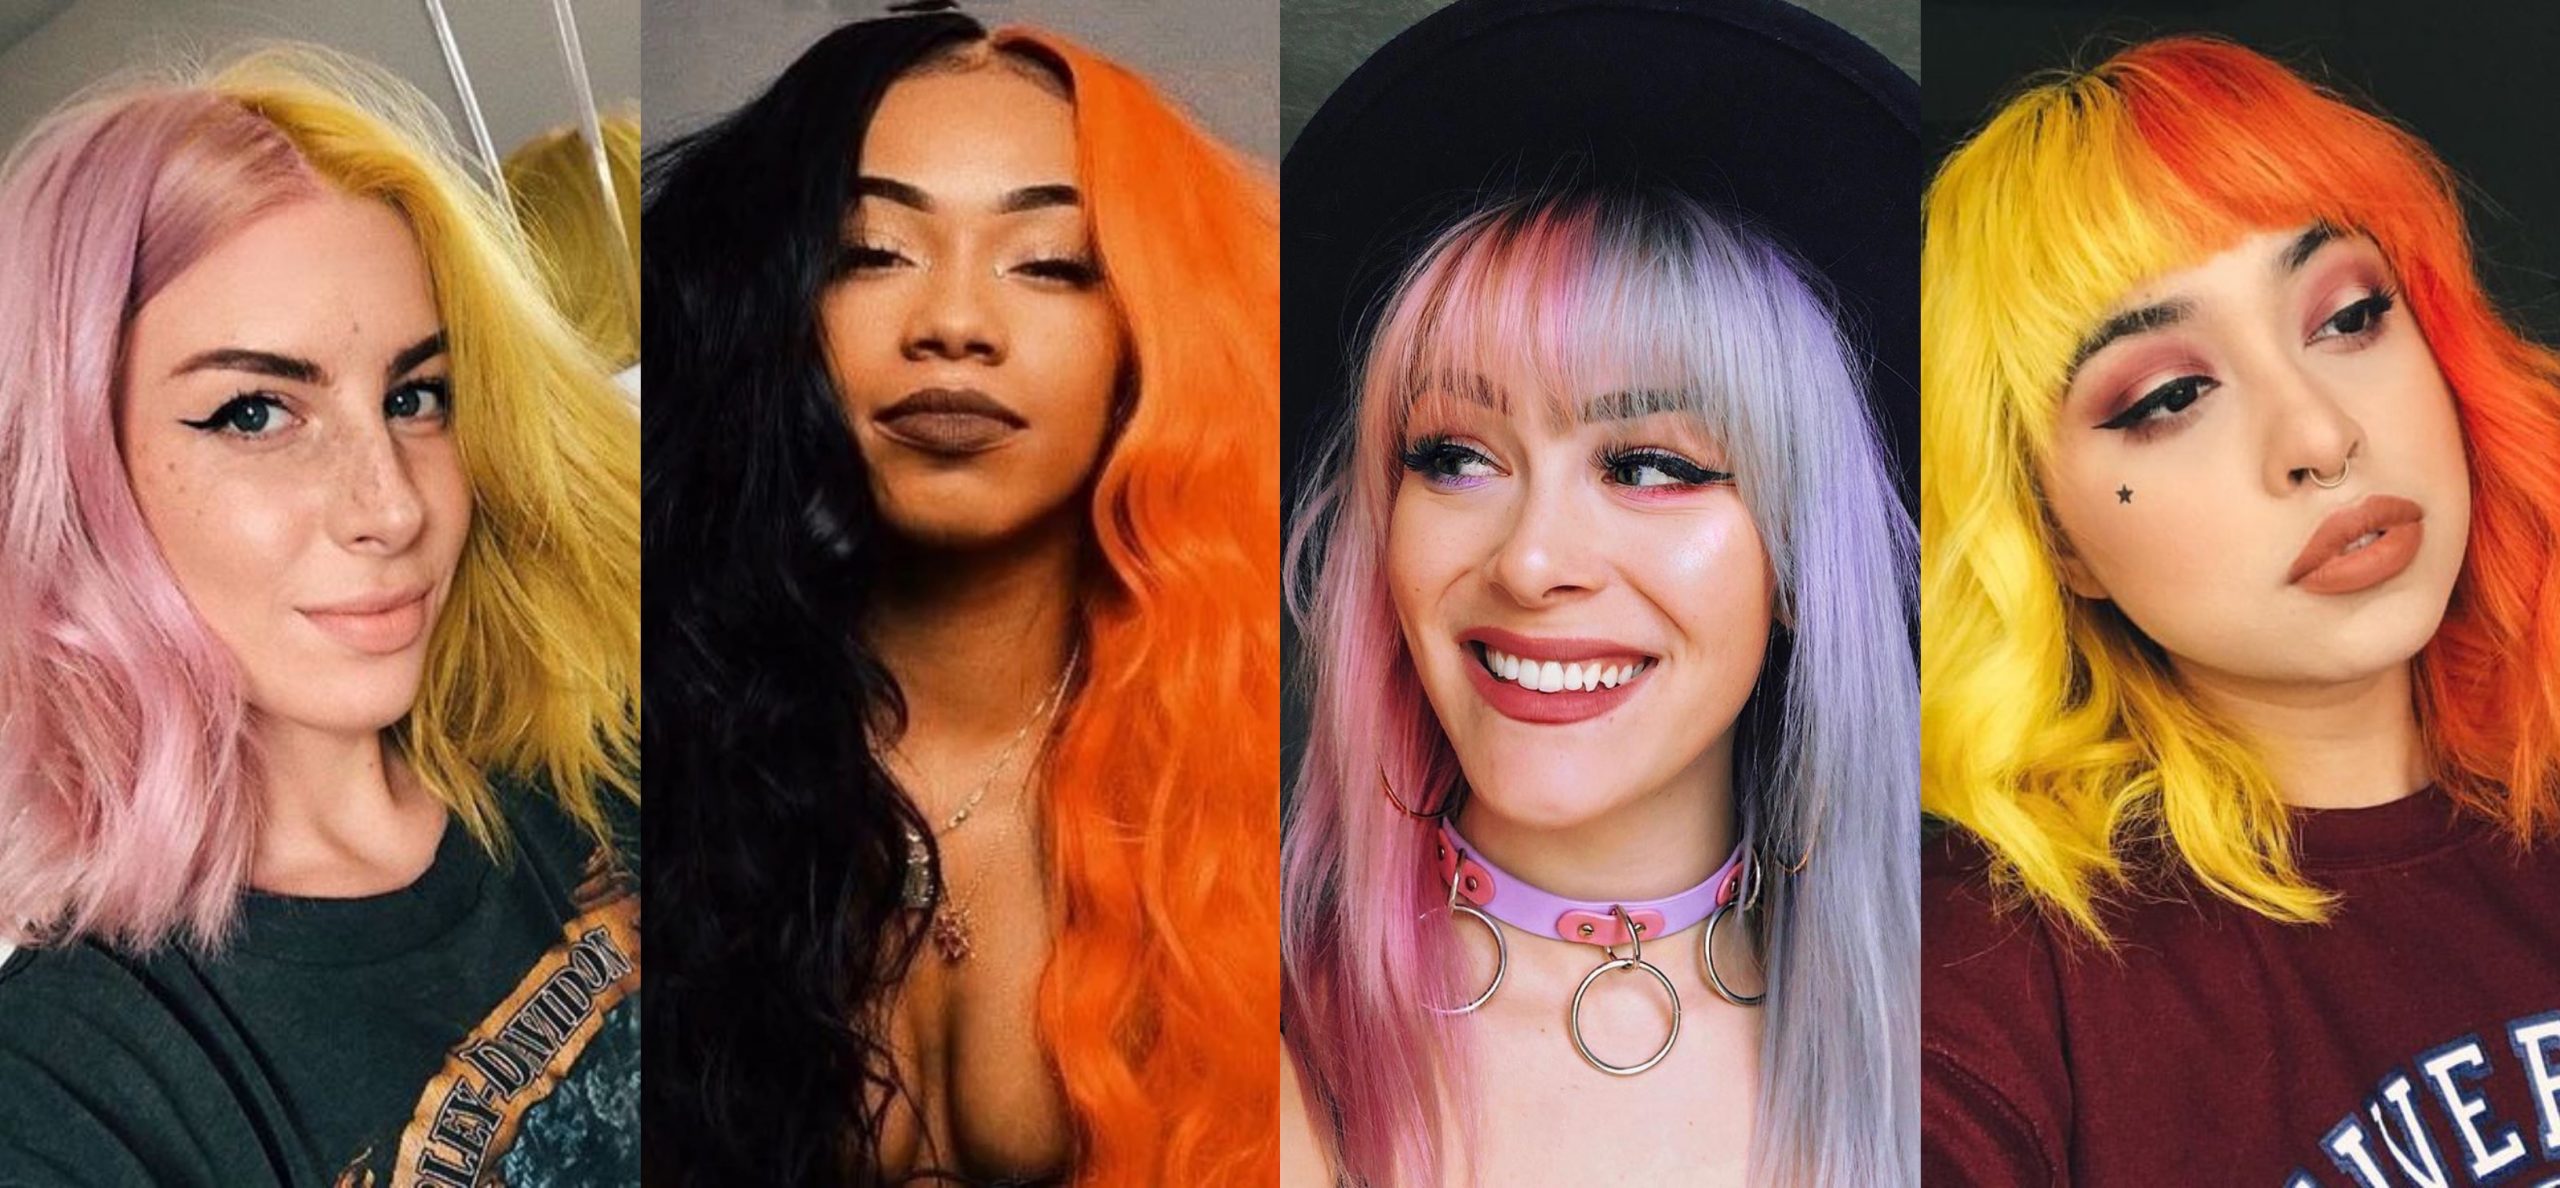 6. Half and Half Hair: The Trend That's Taking Over Instagram - wide 8